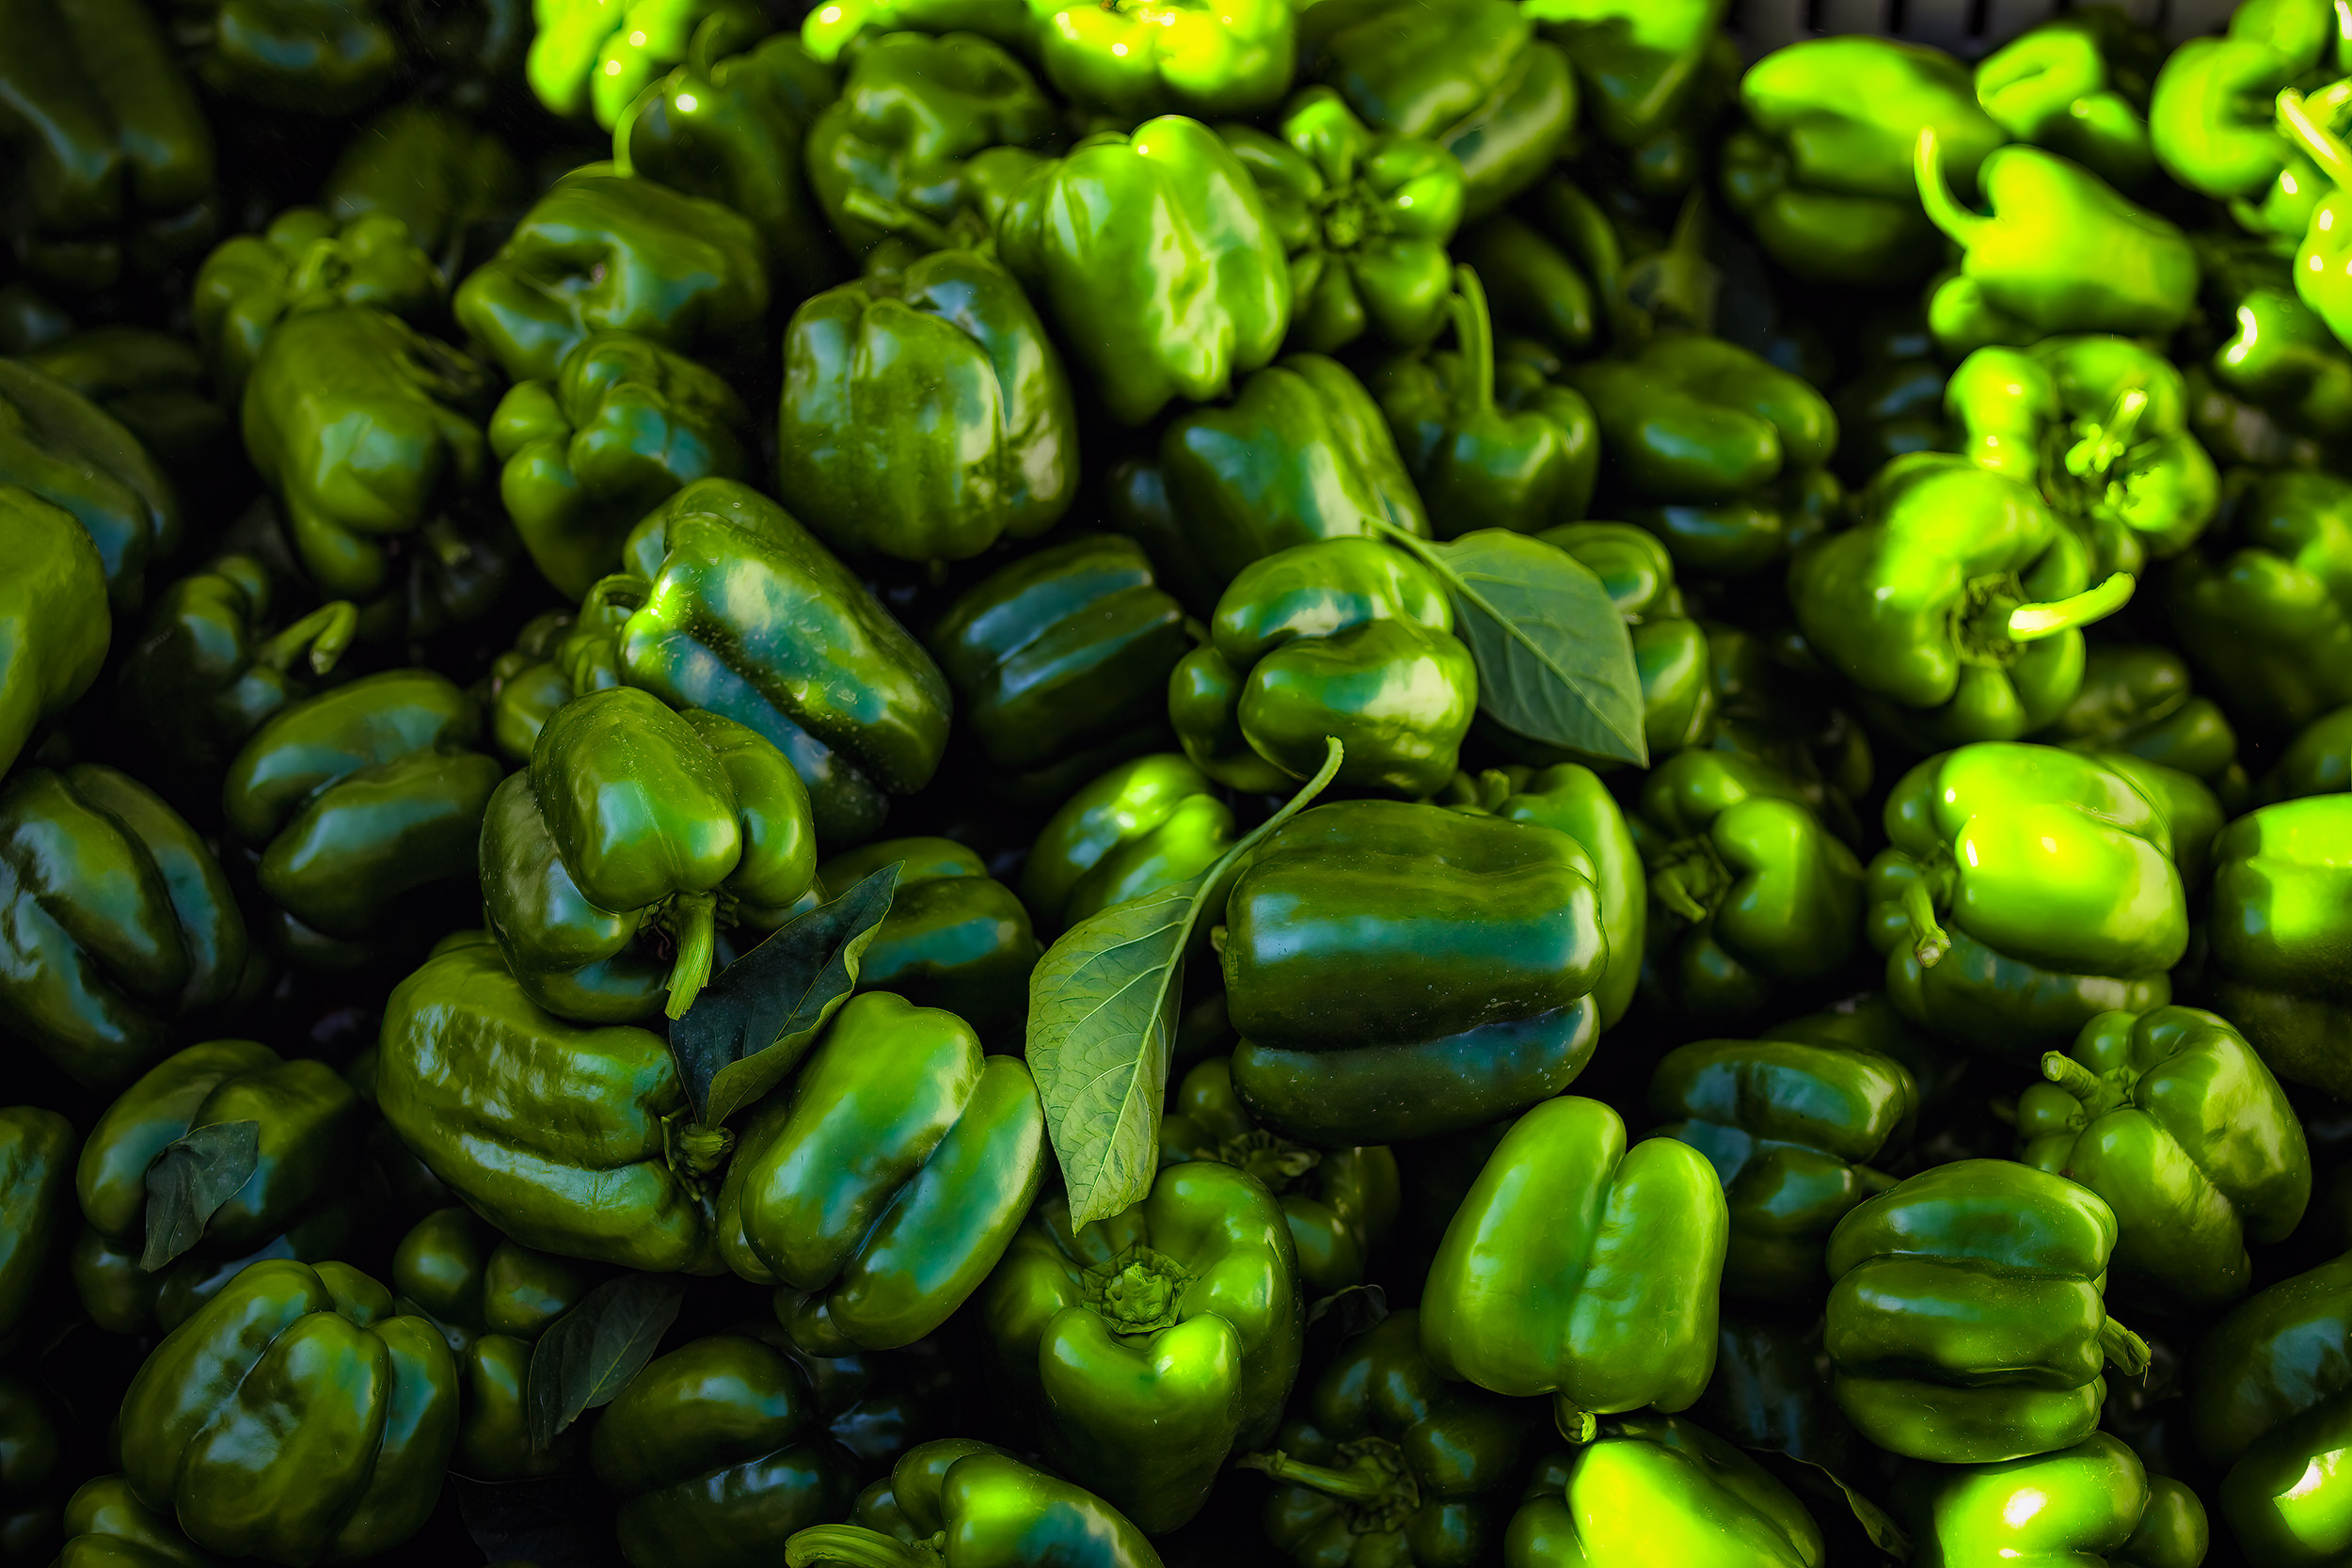 A pile of green peppers. agriculture photography.